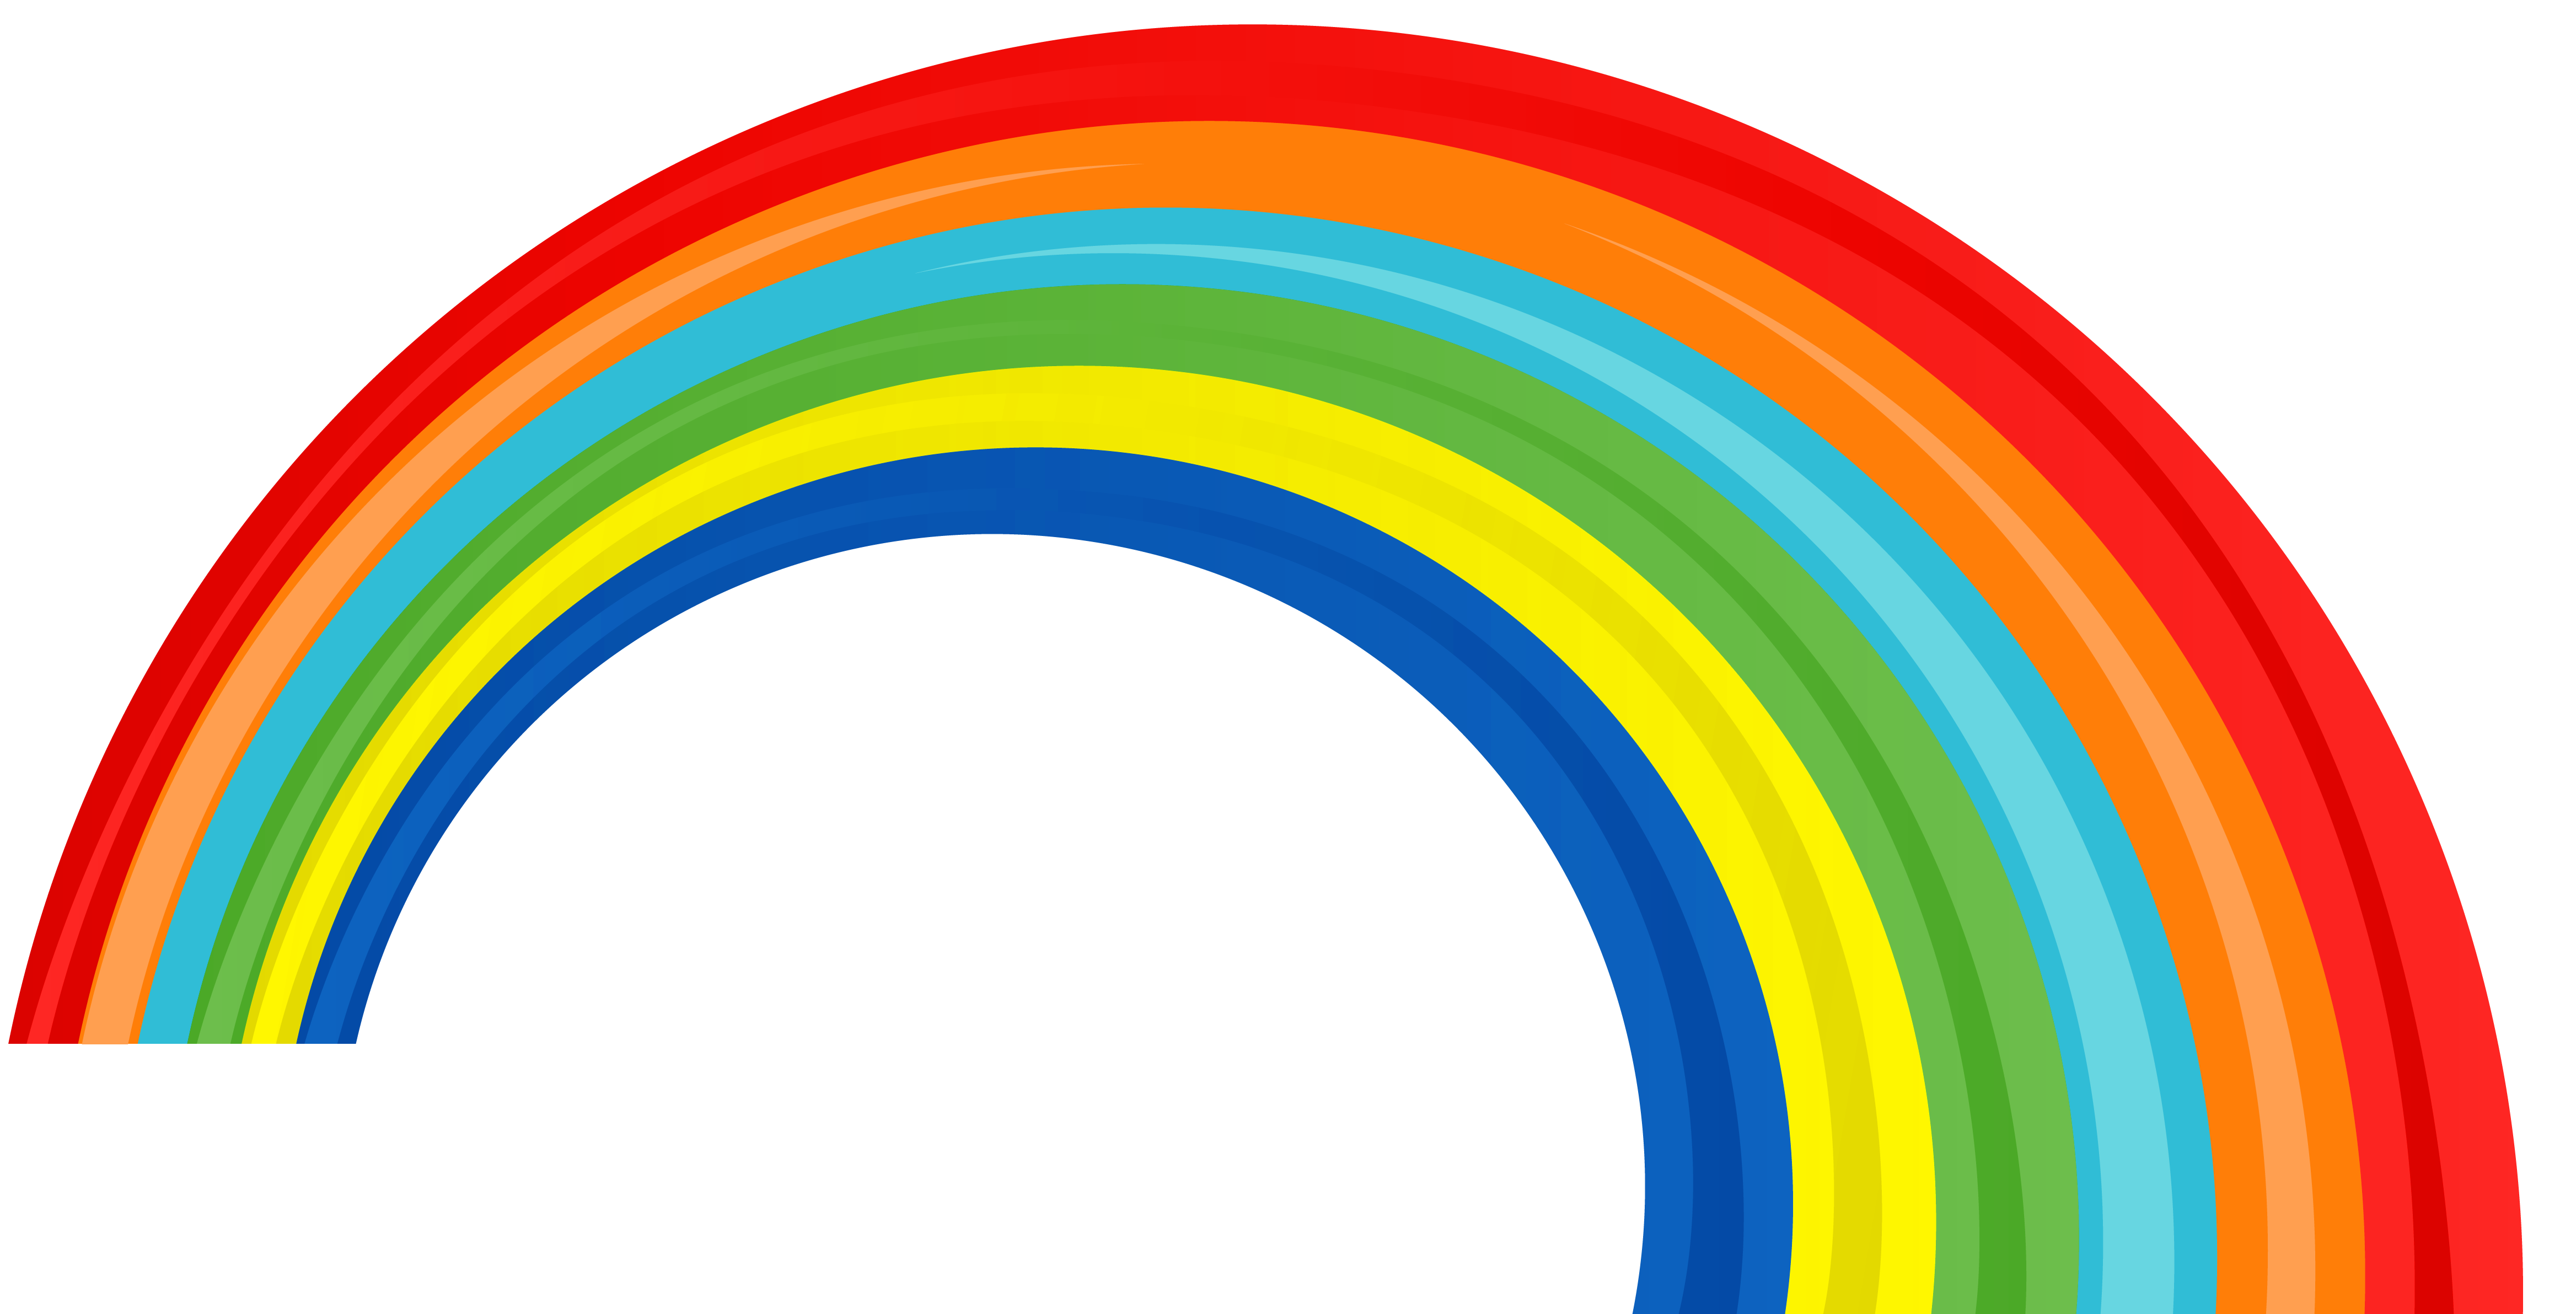 Rainbow PNG Transparent Images | PNG All